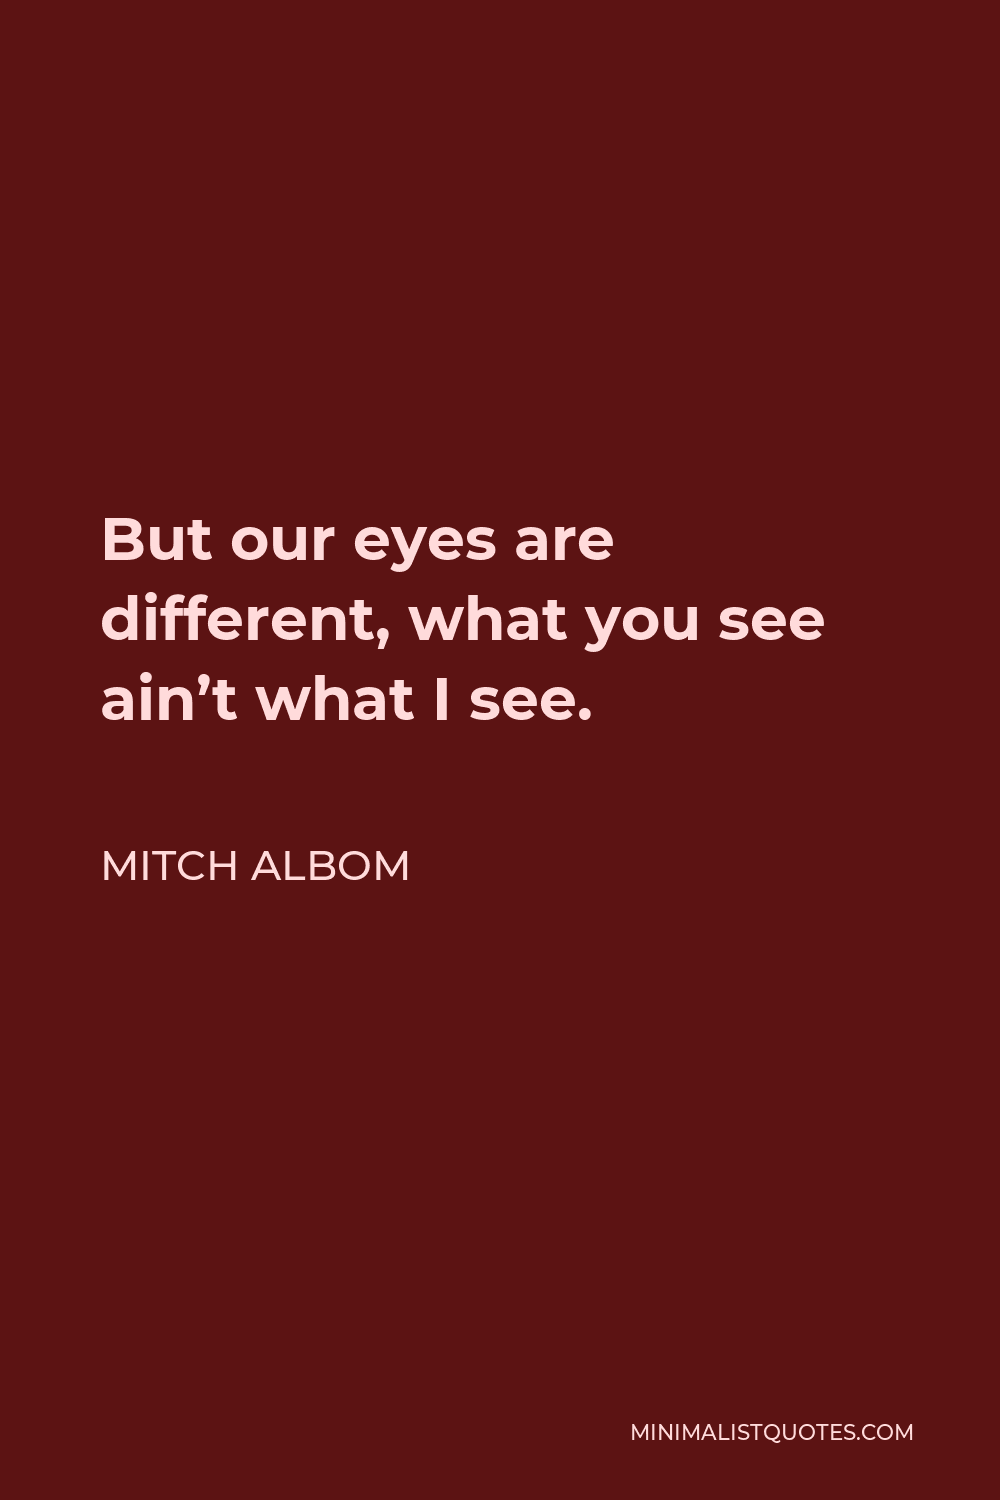 Mitch Albom Quote - But our eyes are different, what you see ain’t what I see.